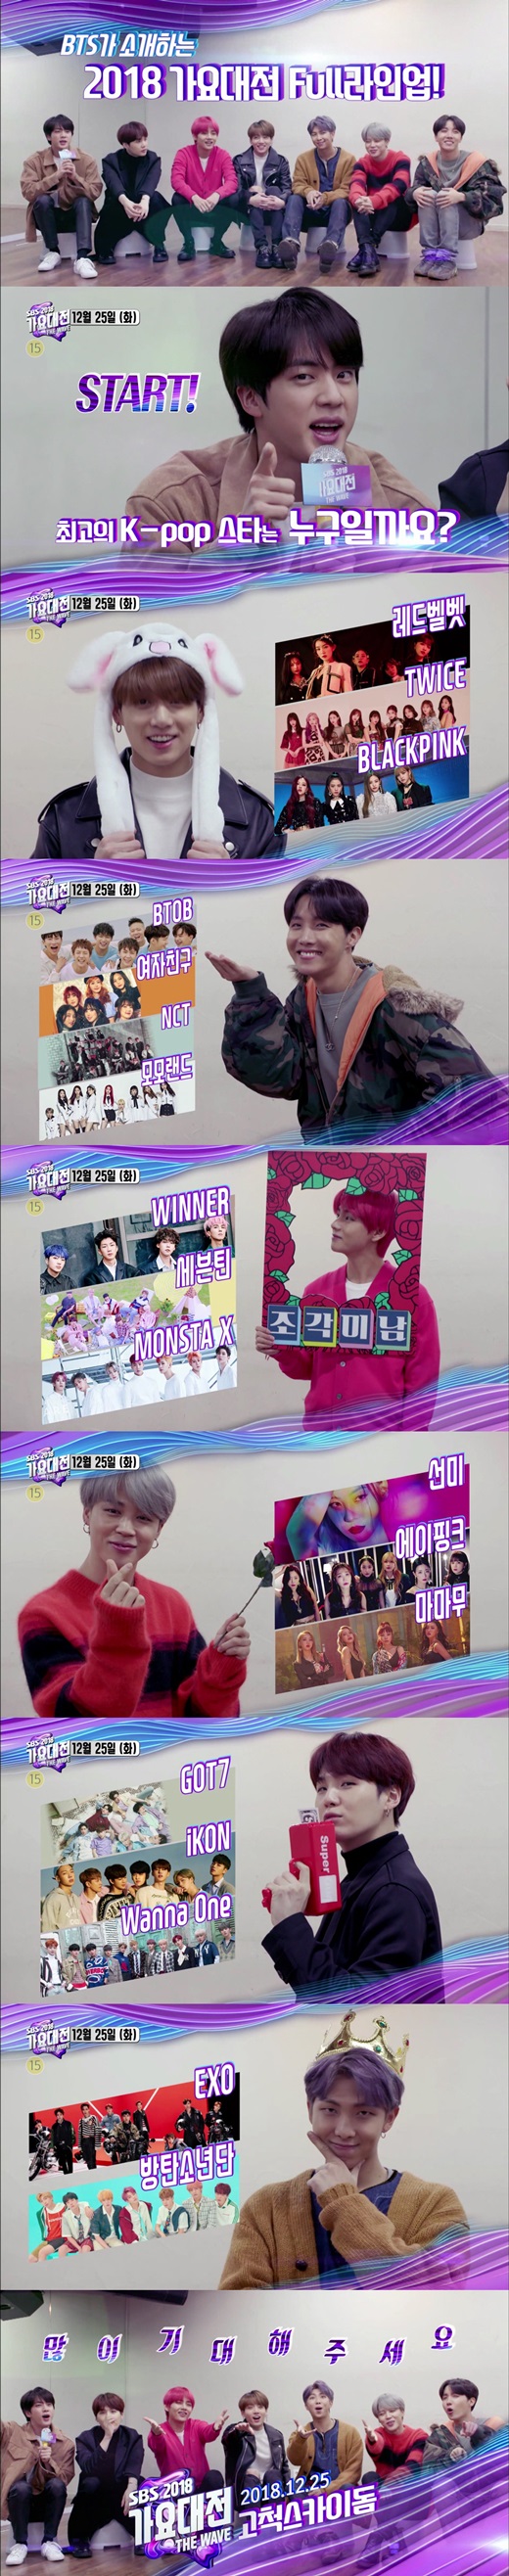 Today (9th) Inkigayo will unveil the FULL Lineup of 2018 SBS Song Daejeon, which BTS introduces.Following the release of the first and second lineup of the 2018 SBS Song Daejeon, this time BTS will appear as a guide to introduce the entire lineup.BTS Jean raised the expectation of 2018 SBS Song Daejeon with the question Who is the best k-pop star of the year?These days, Jung Guk, who wore a nuclear-in-the-tem rabbit hat, announced the appearance of Red Velvet, Twice, Black Pink, and the smile angel Jay Hop of Bitoo, Girlfriend, NCT, Momo Land, and the sculpted man Buga of Winner, Seventeen, and Monster X.Ji Min, who was shooting a woman with a cute heart, introduced Stern, A Pink, Mama, Shuga with money gun, IKON, Wanna One, and EXO, BTS.This is the completion of the previous-class lineup of 18 teams of k-pop stars in Koreas Choi Jing Award, which was named in the 2018 SBS Song Daejeon. The FULL Lineup video of the 2018 SBS Song Daejeon, which BTS introduces, will be released for the first time during the broadcast of Inkigayo today.Meanwhile, the 2018 SBS Song Daejeon, which will come as a Christmas gift on the 25th (Tuesday), will look at the flow of K-POP and Hallyu with singers who have reached their peaks by writing numerous records during the year under the theme of THE WAVE.The 2018 SBS Song Daejeon, the biggest festival of the year, will be broadcast live on the 25th (Fahrenheit) at the Gocheok Sky Dome in Seoul.